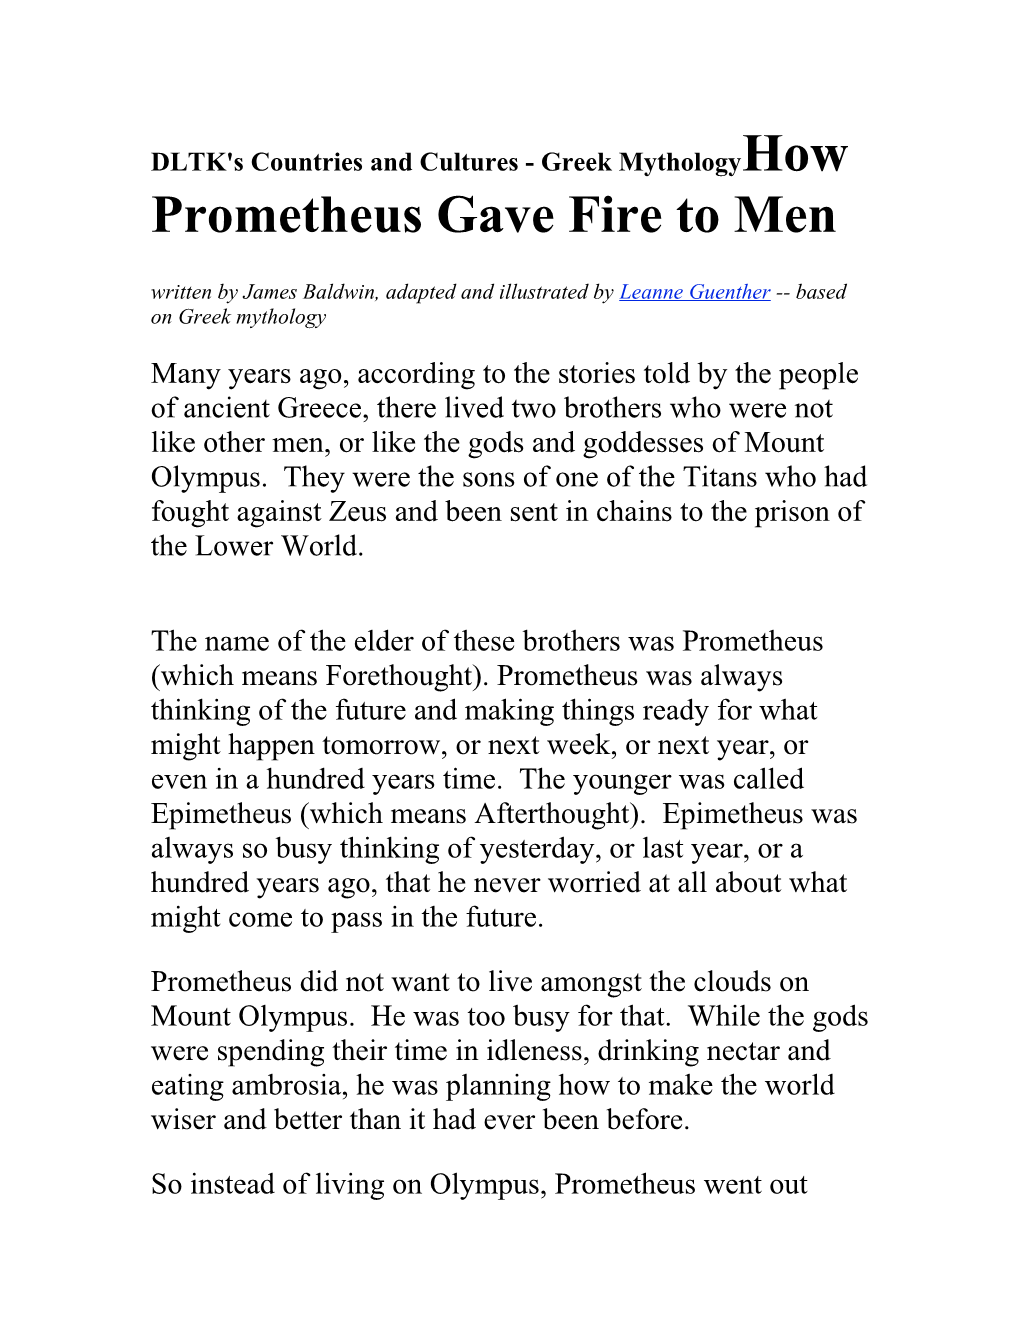 DLTK's Countries and Cultures - Greek Mythology How Prometheus Gave Fire to Men